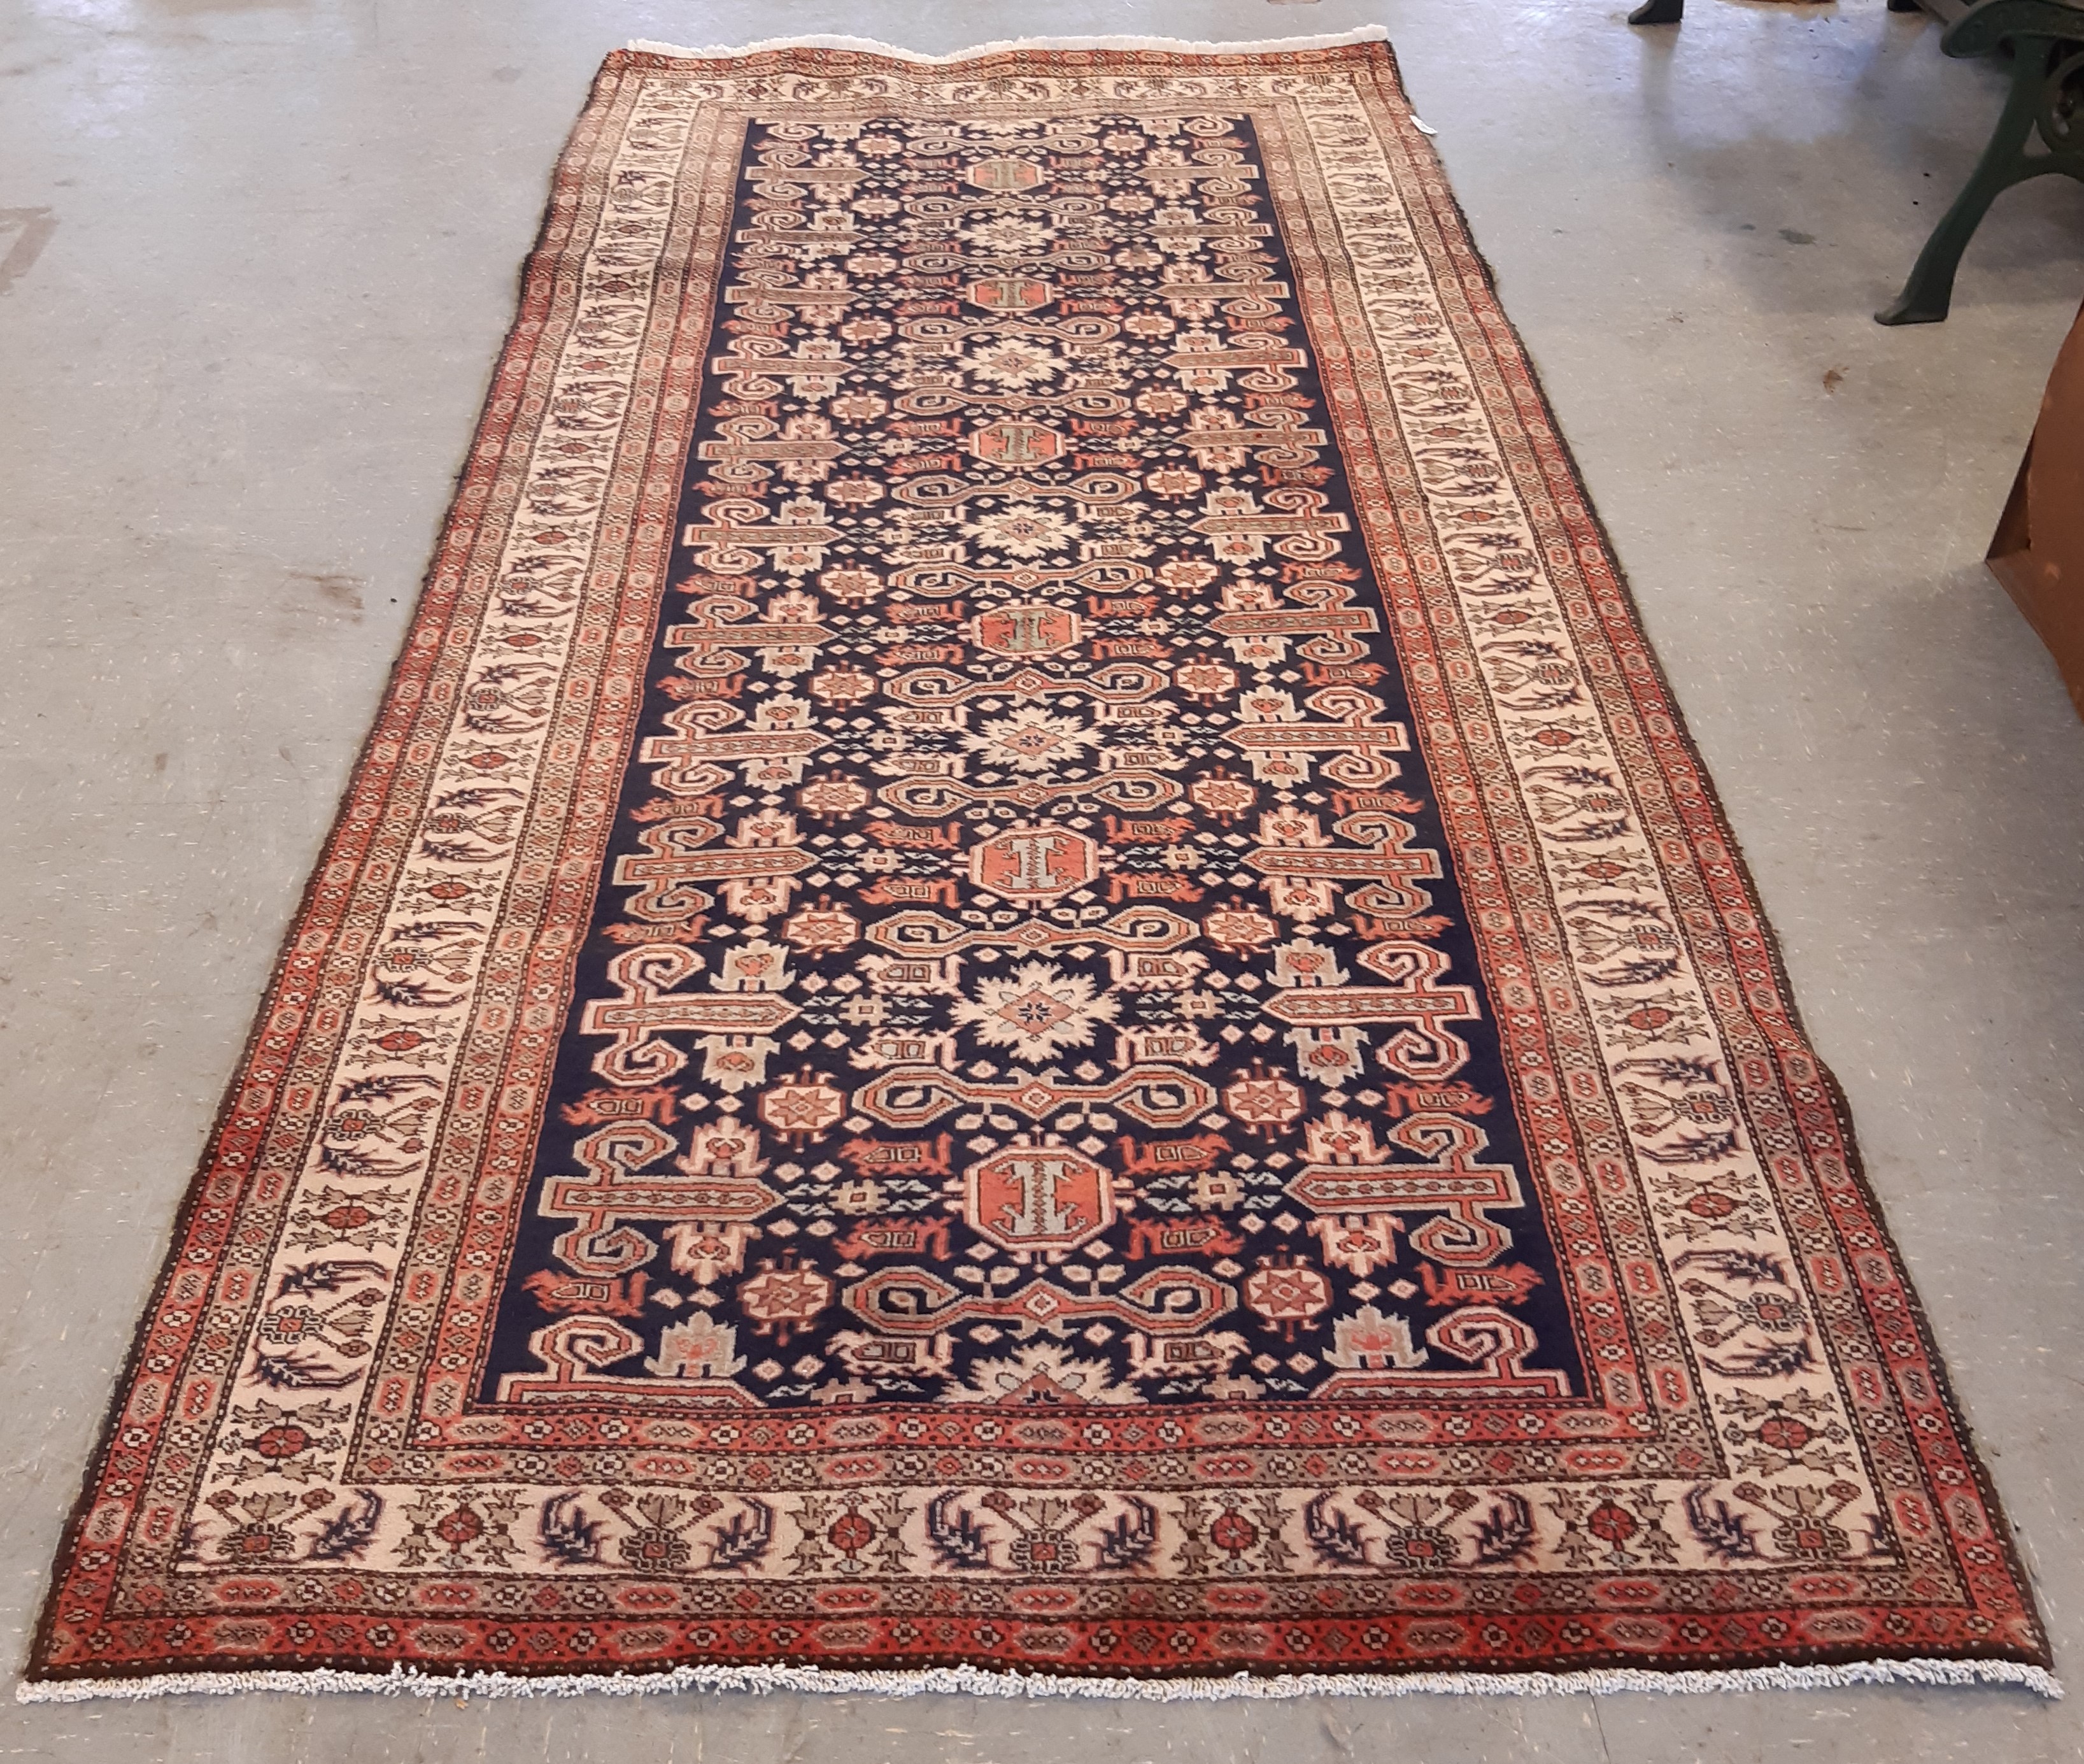 Anatolian style hand woven runner, 311cm x 144cm Note: free delivery available within 30 miles of